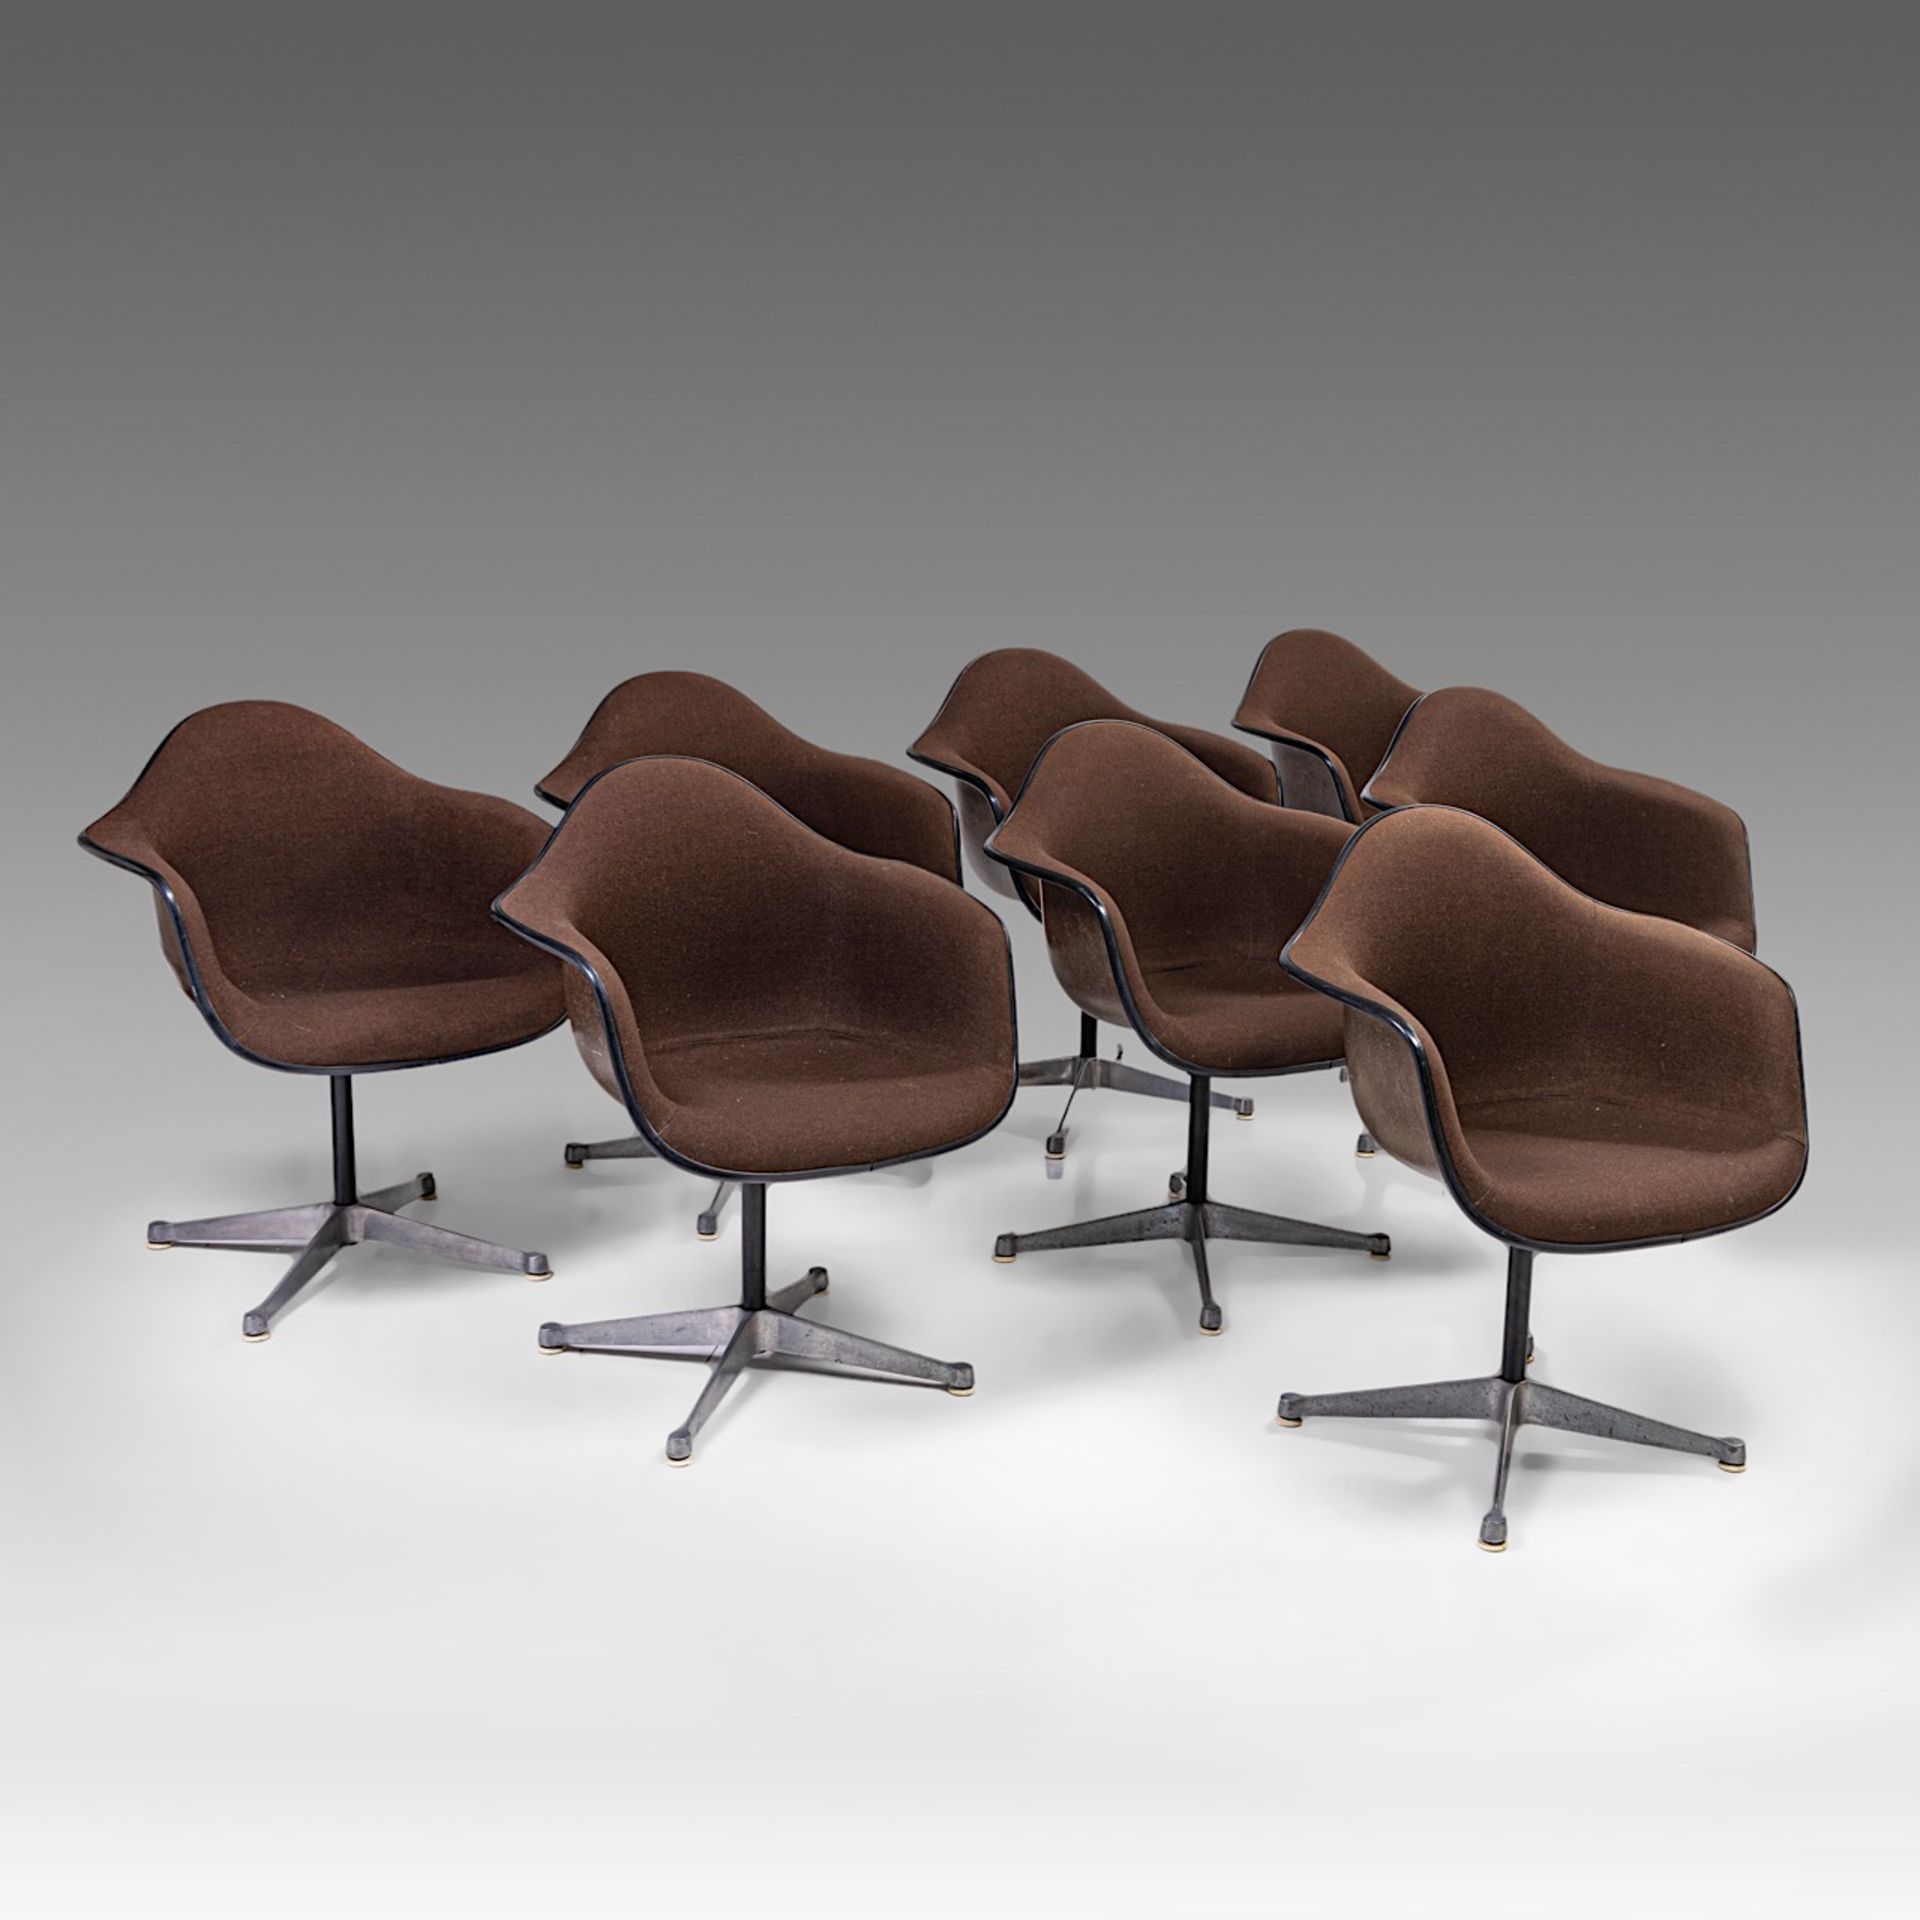 A set of 8 Charles & Ray Eames fibreglass shell chairs for Herman Miller, H 79 cm